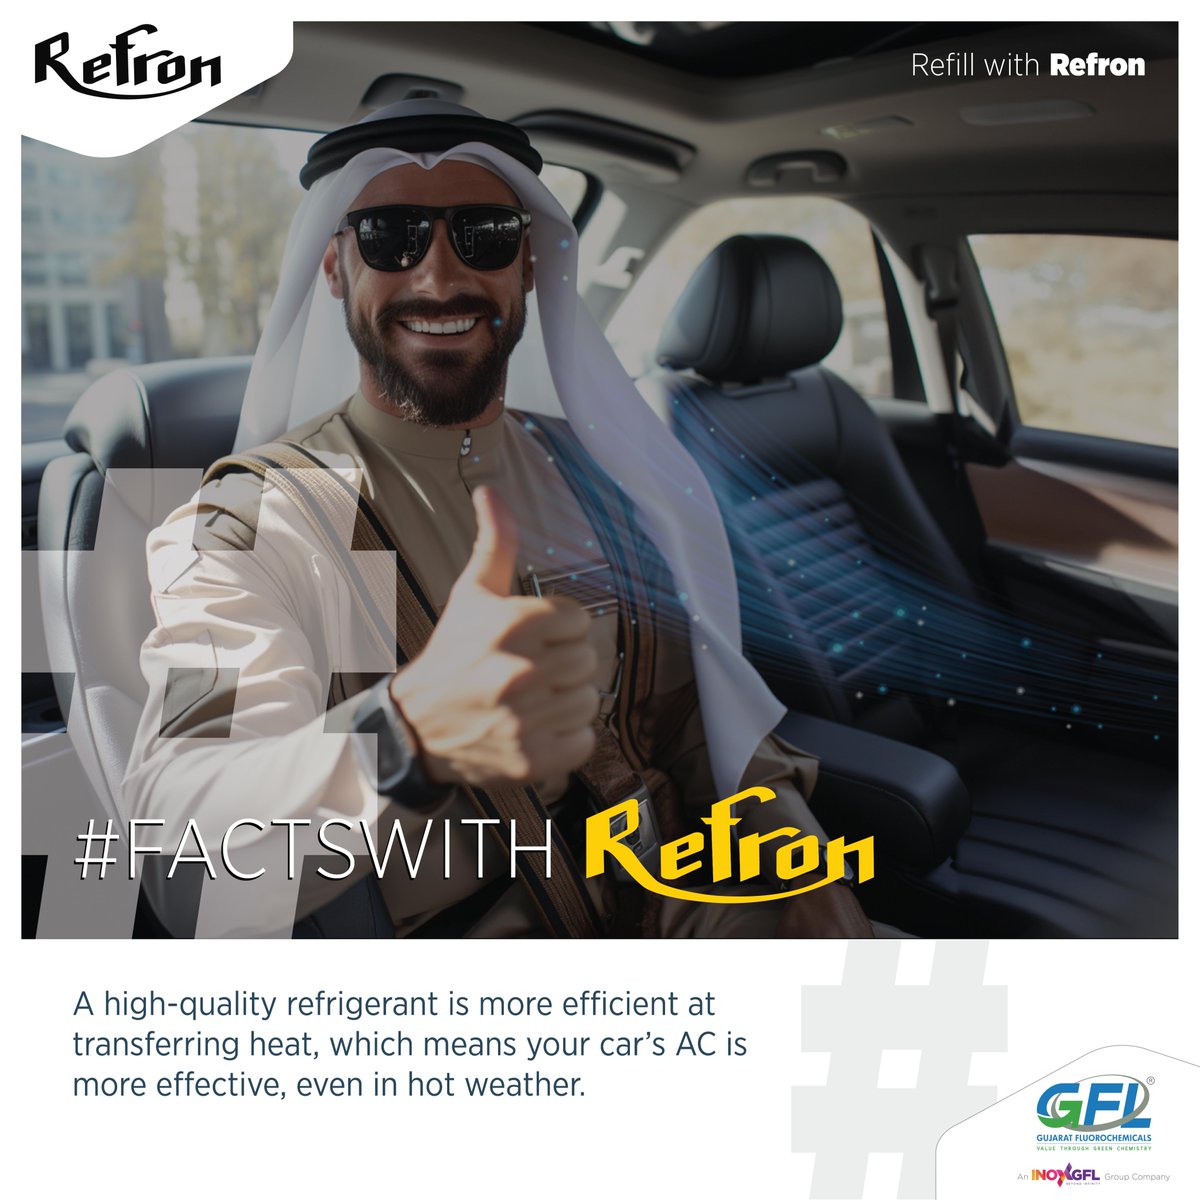 Choosing a refrigerant with excellent heat transfer capacity is key to reliable cooling in any weather. Don't compromise on comfort. Ask your technician about a high-quality refrigerant.

#CoolingSolution #Weatherproof #QualityRefrigerant #refillwithrefron #gfl